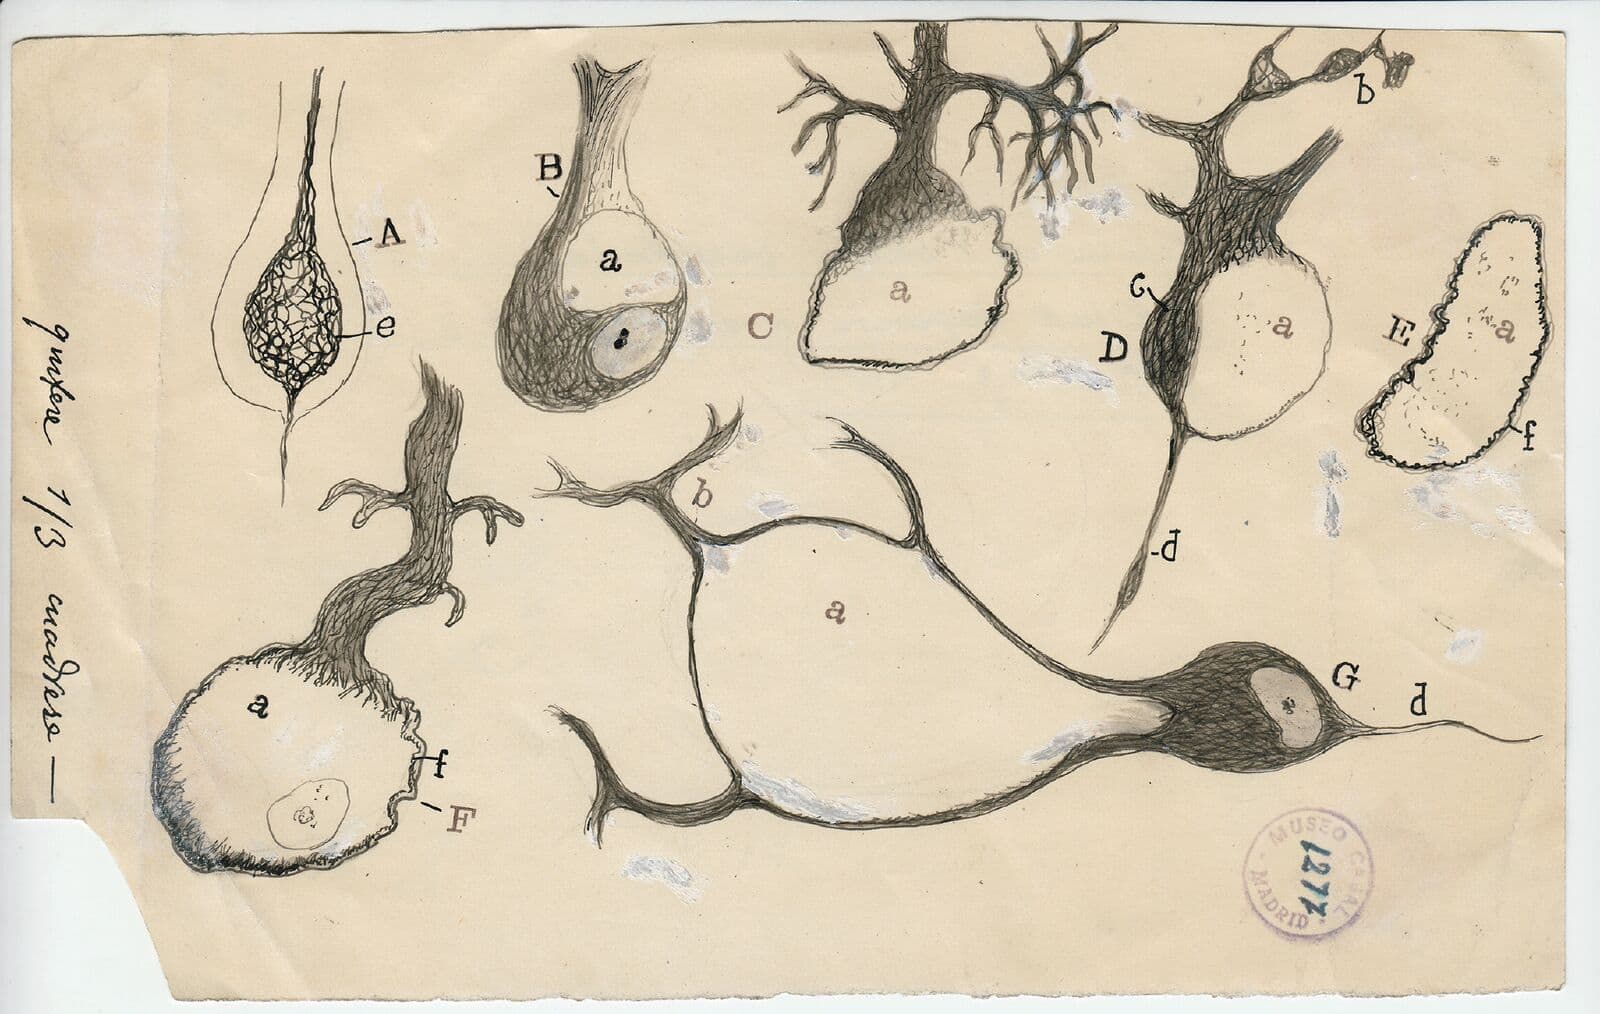 Santiago Ramón y Cajal ink and pencil drawing of injured Purkinje neurons, created in 1914. (Courtesy of Instituto Cajal)